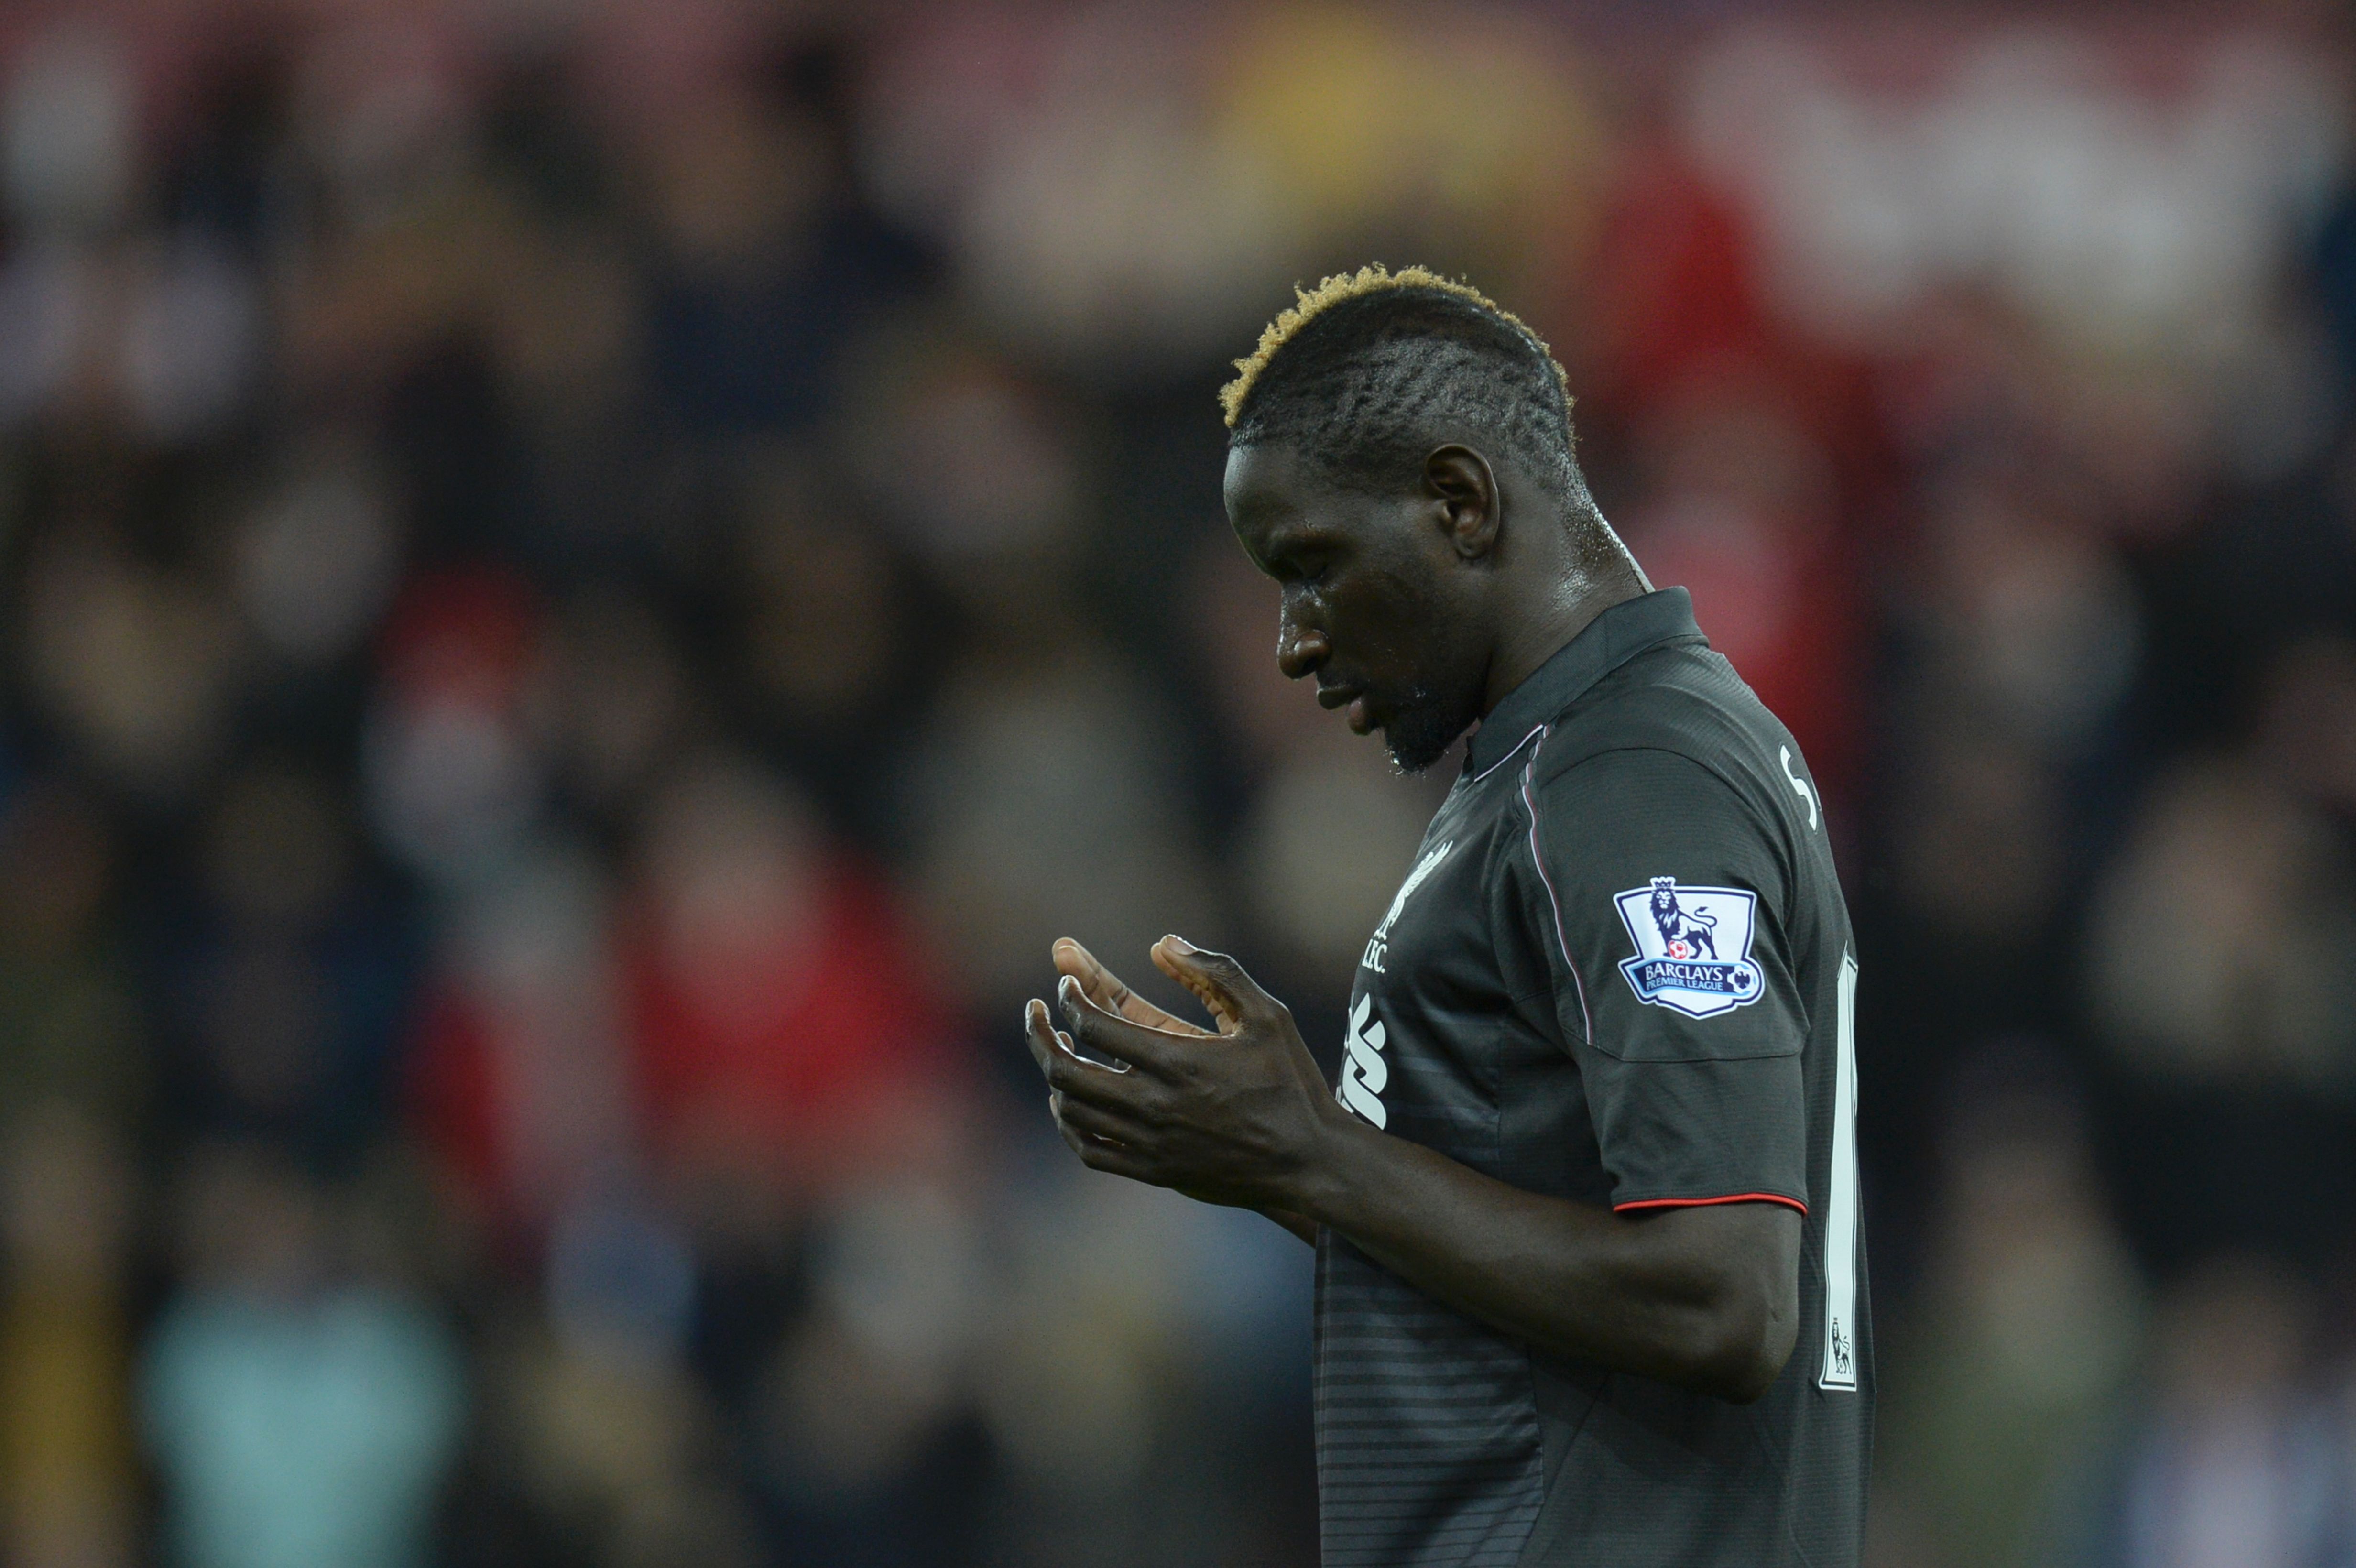 Liverpool's French defender Mamadou Sakho says a prayer before kick off of the English Premier League football match between Sunderland and Liverpool at the Stadium of Light in Sunderland, north east England, on December 30, 2015.  / AFP / OLI SCARFF        (Photo credit should read OLI SCARFF/AFP/Getty Images)